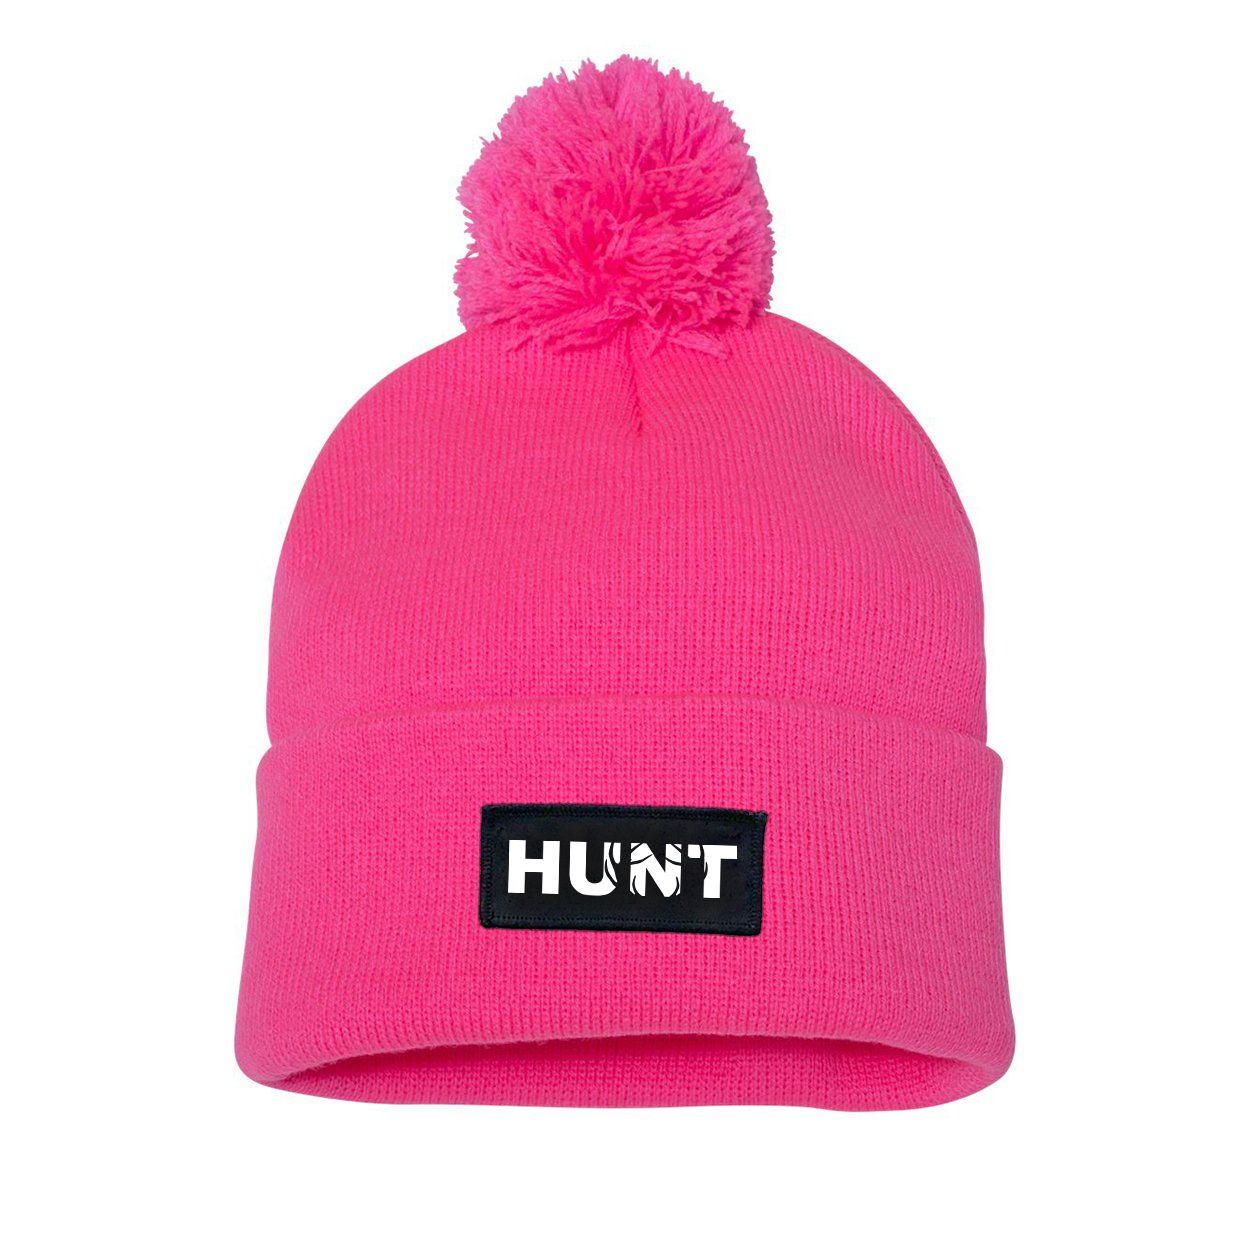 Hunt Rack Logo Night Out Woven Patch Roll Up Pom Knit Beanie Pink (White Logo)